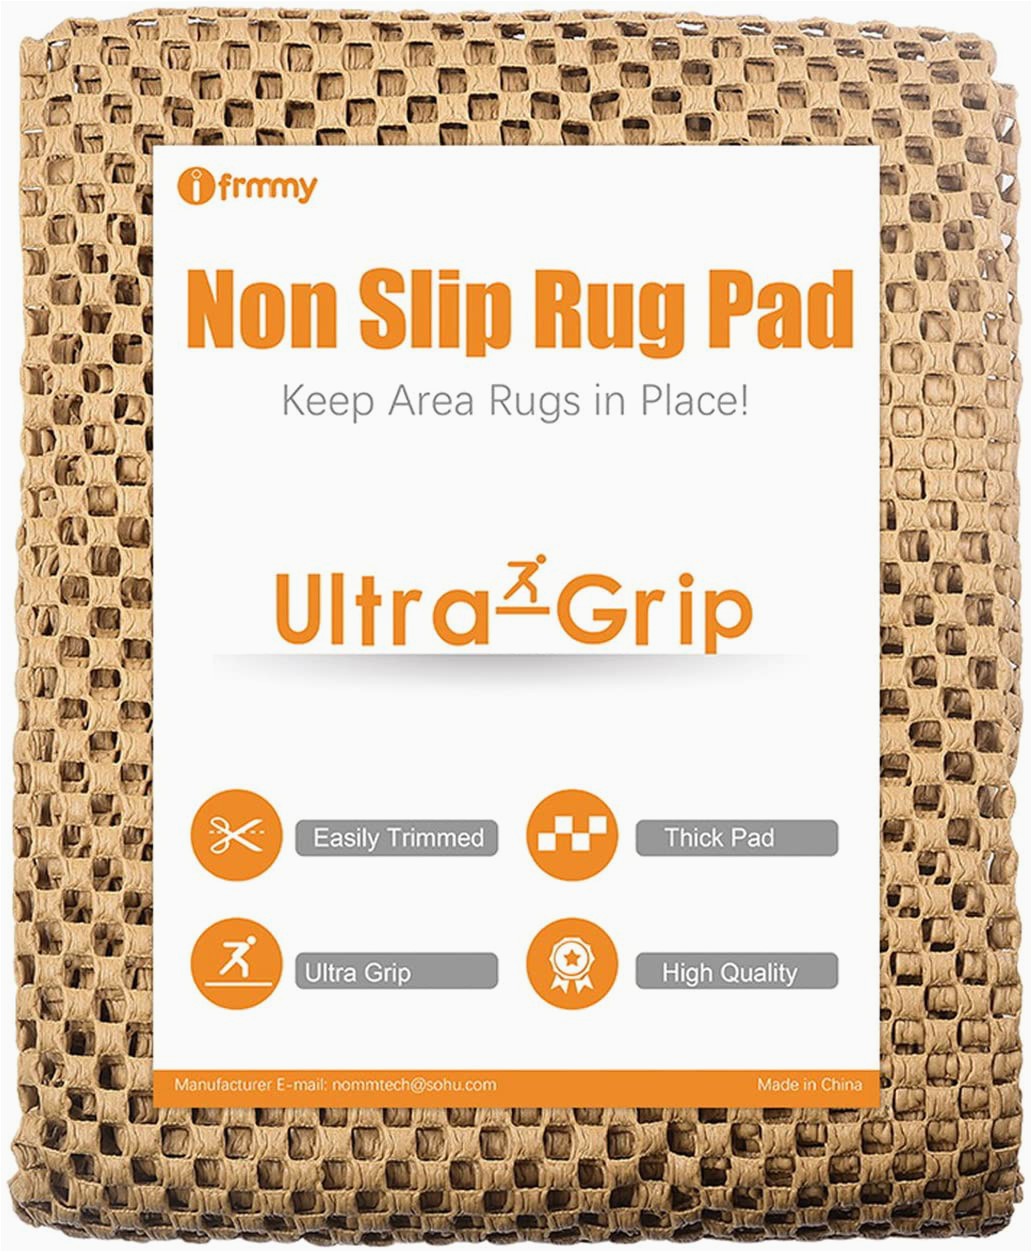 Area Rug Gripper Hardwood Floors ifrmmy Premium Extra Thick Non Slip area Rug Pad Supper Gripper Hardwood Floors Keeps Your Rugs In Place 2×4 Ft